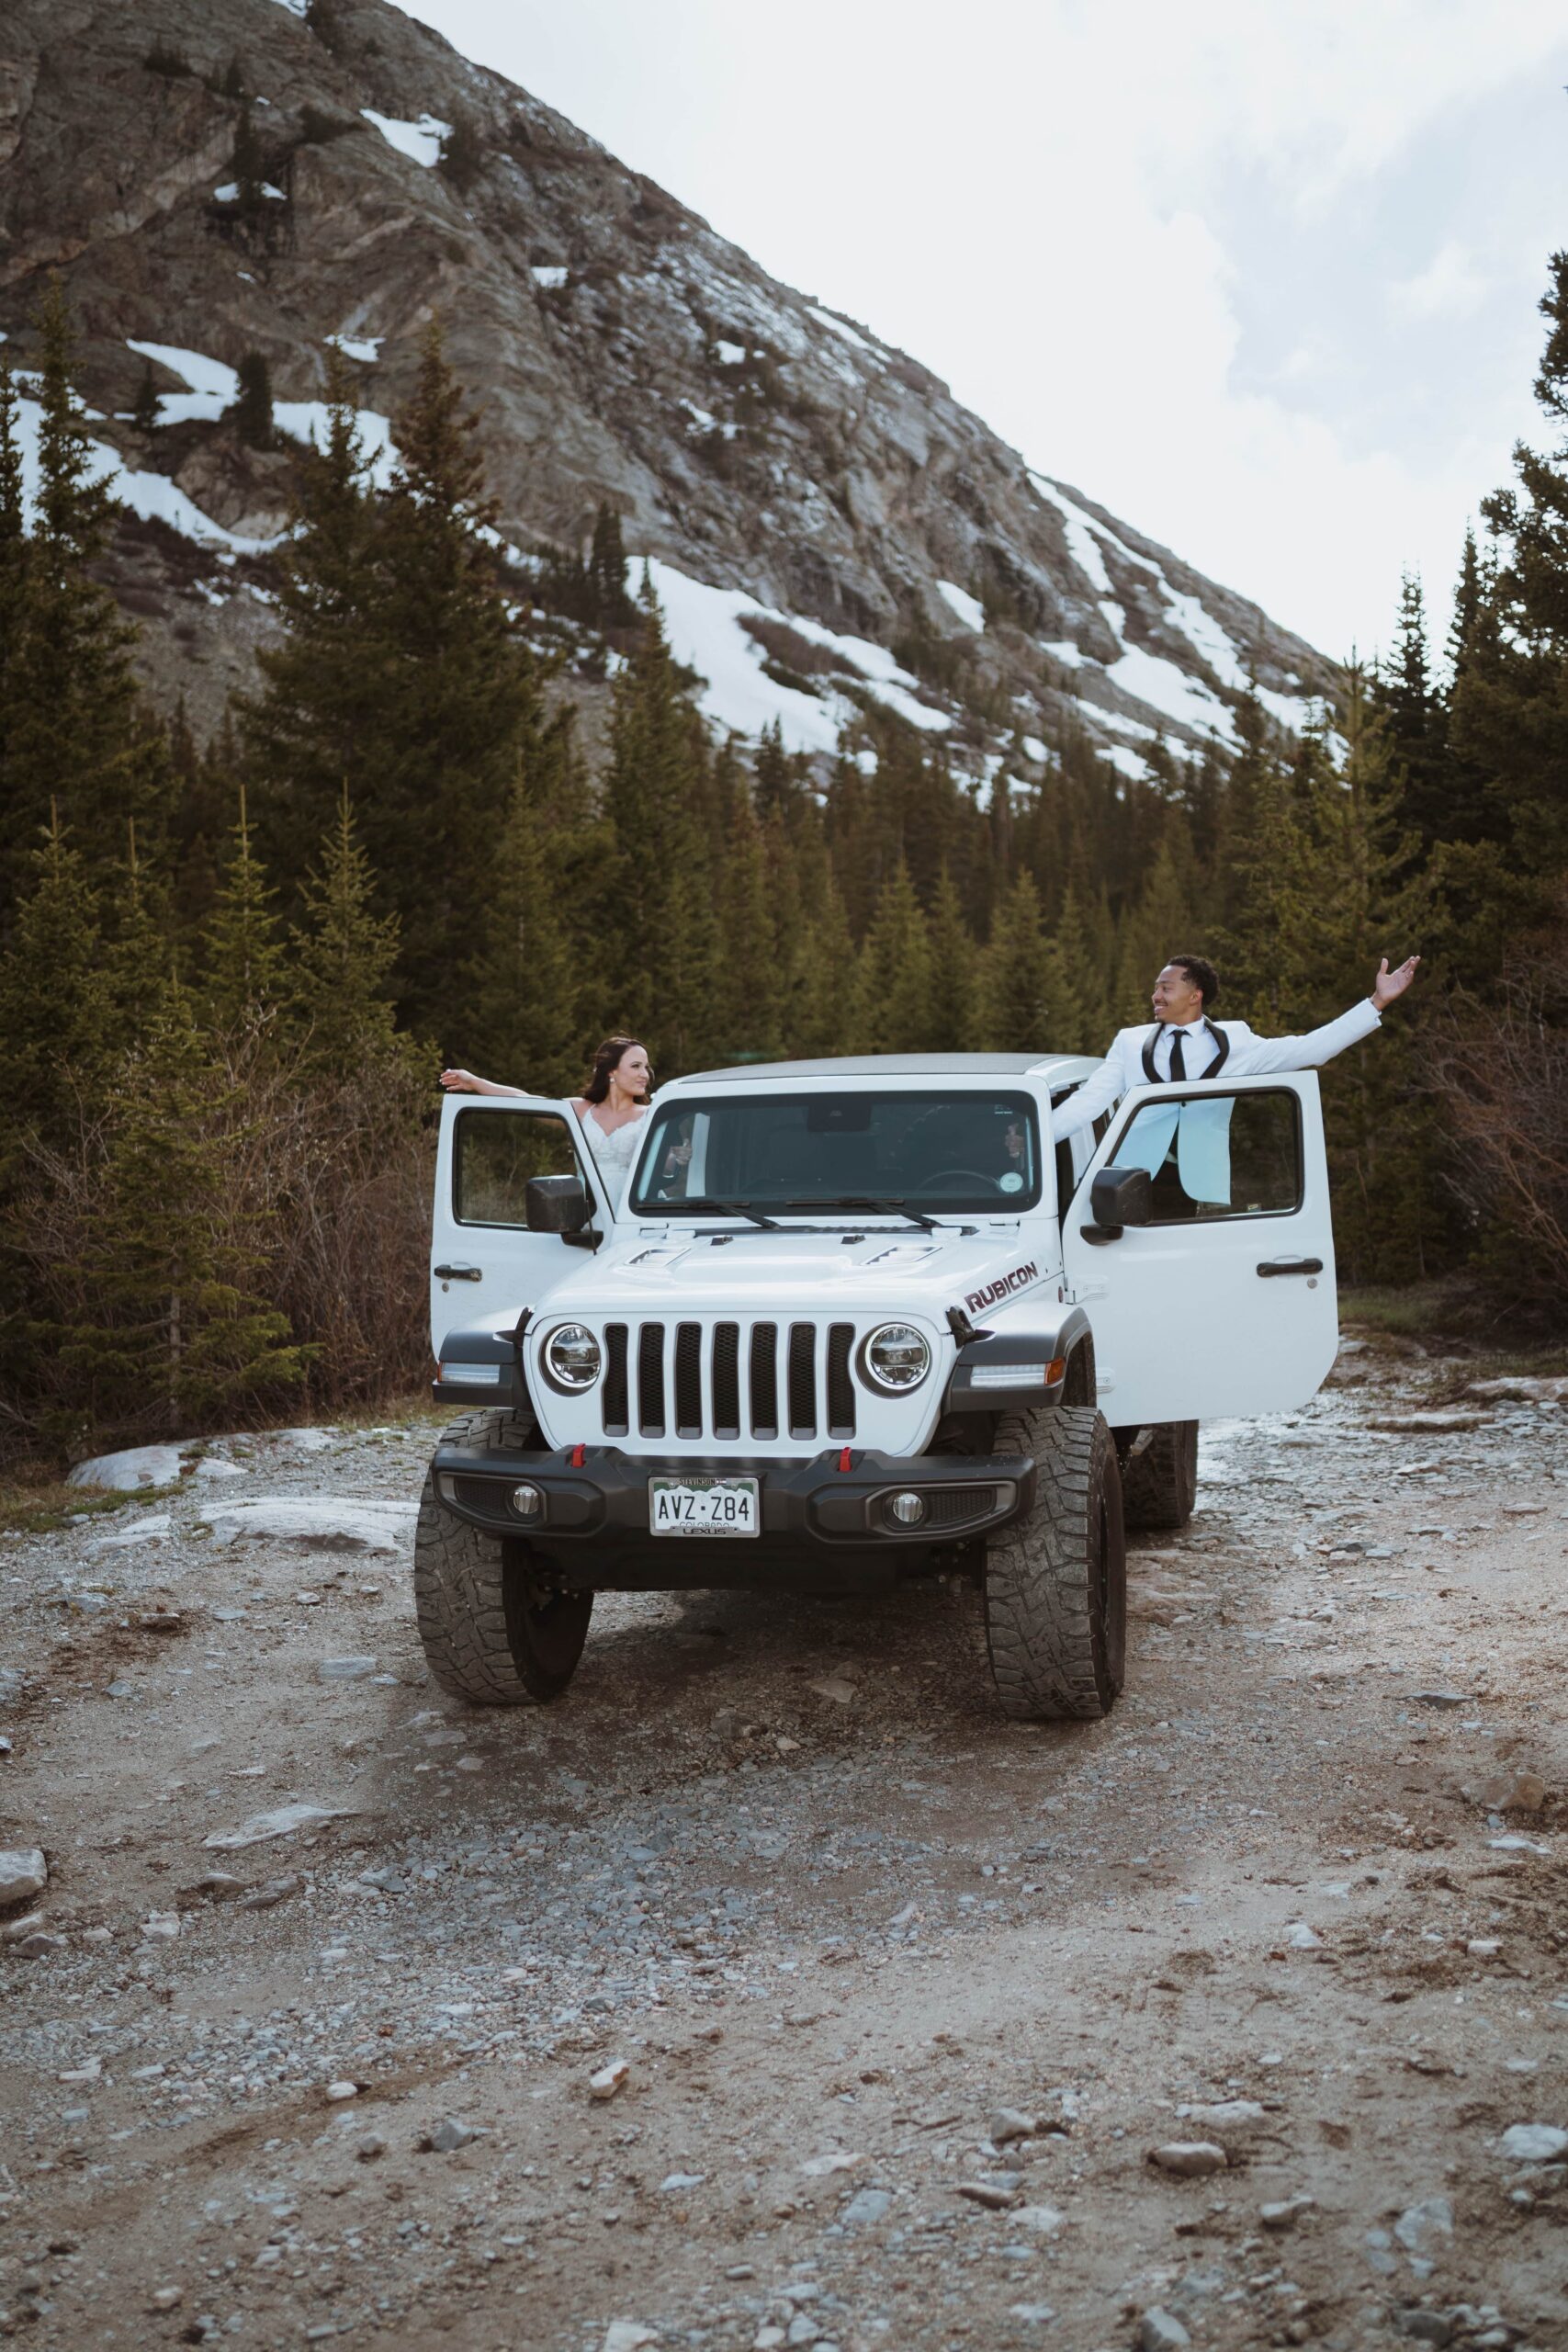 off-roading breckenridge elopement adventure. vows at a hidden waterfall, followed with off roading to alpine lakes and mountain passes. summer mountain elopement with private vows.